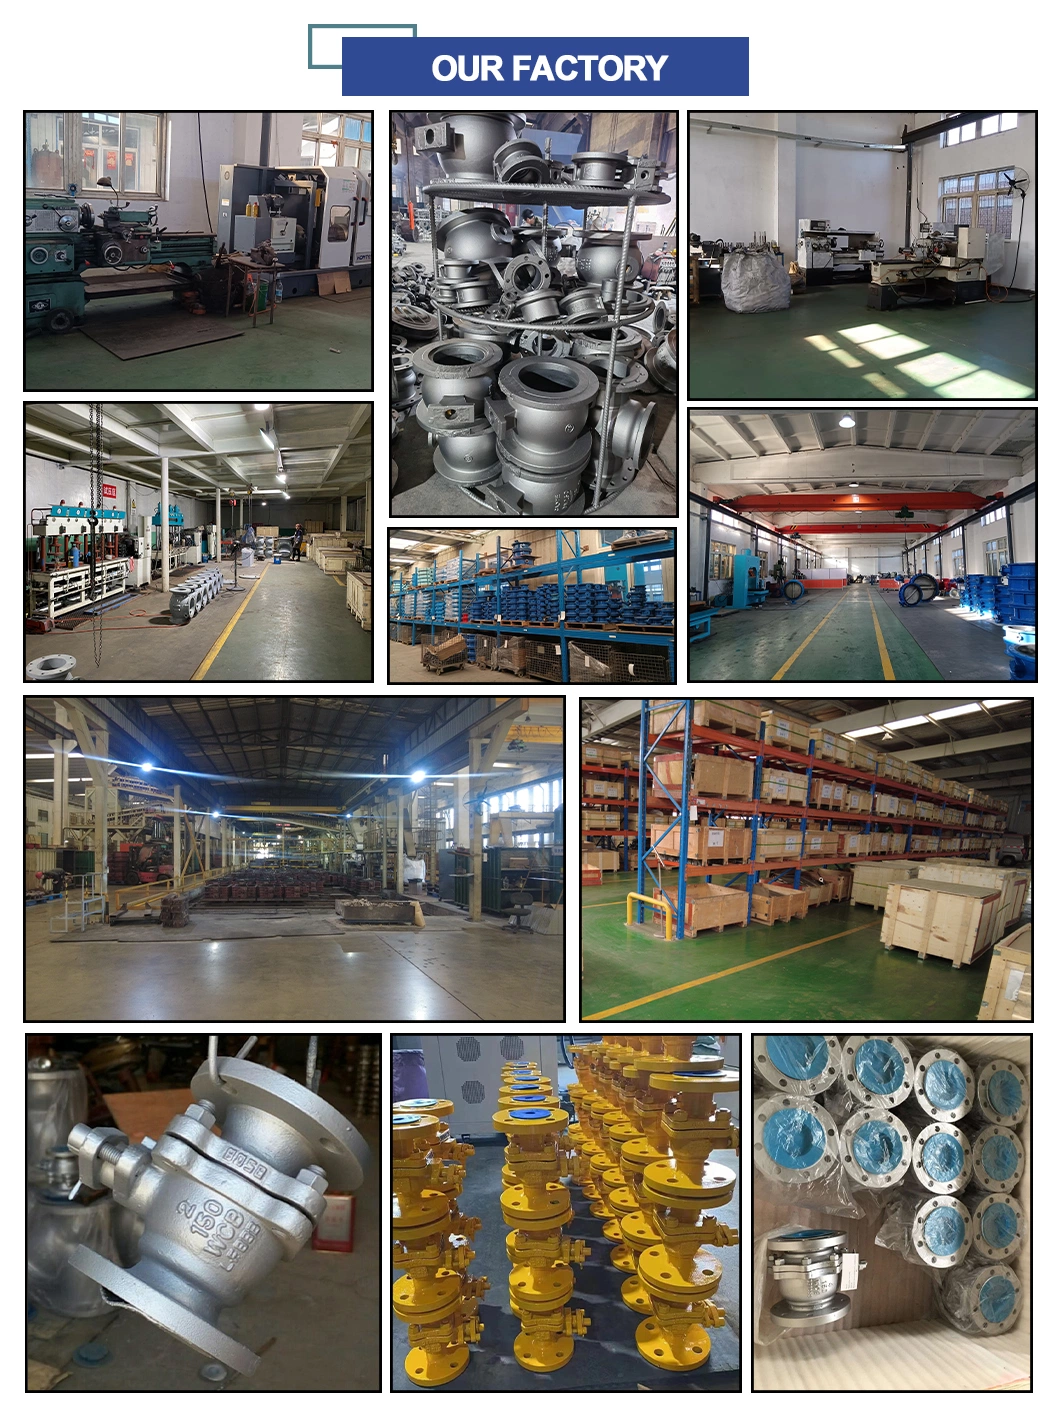 High Temperature Solenoid Valve Ball Valve for Industrial Use